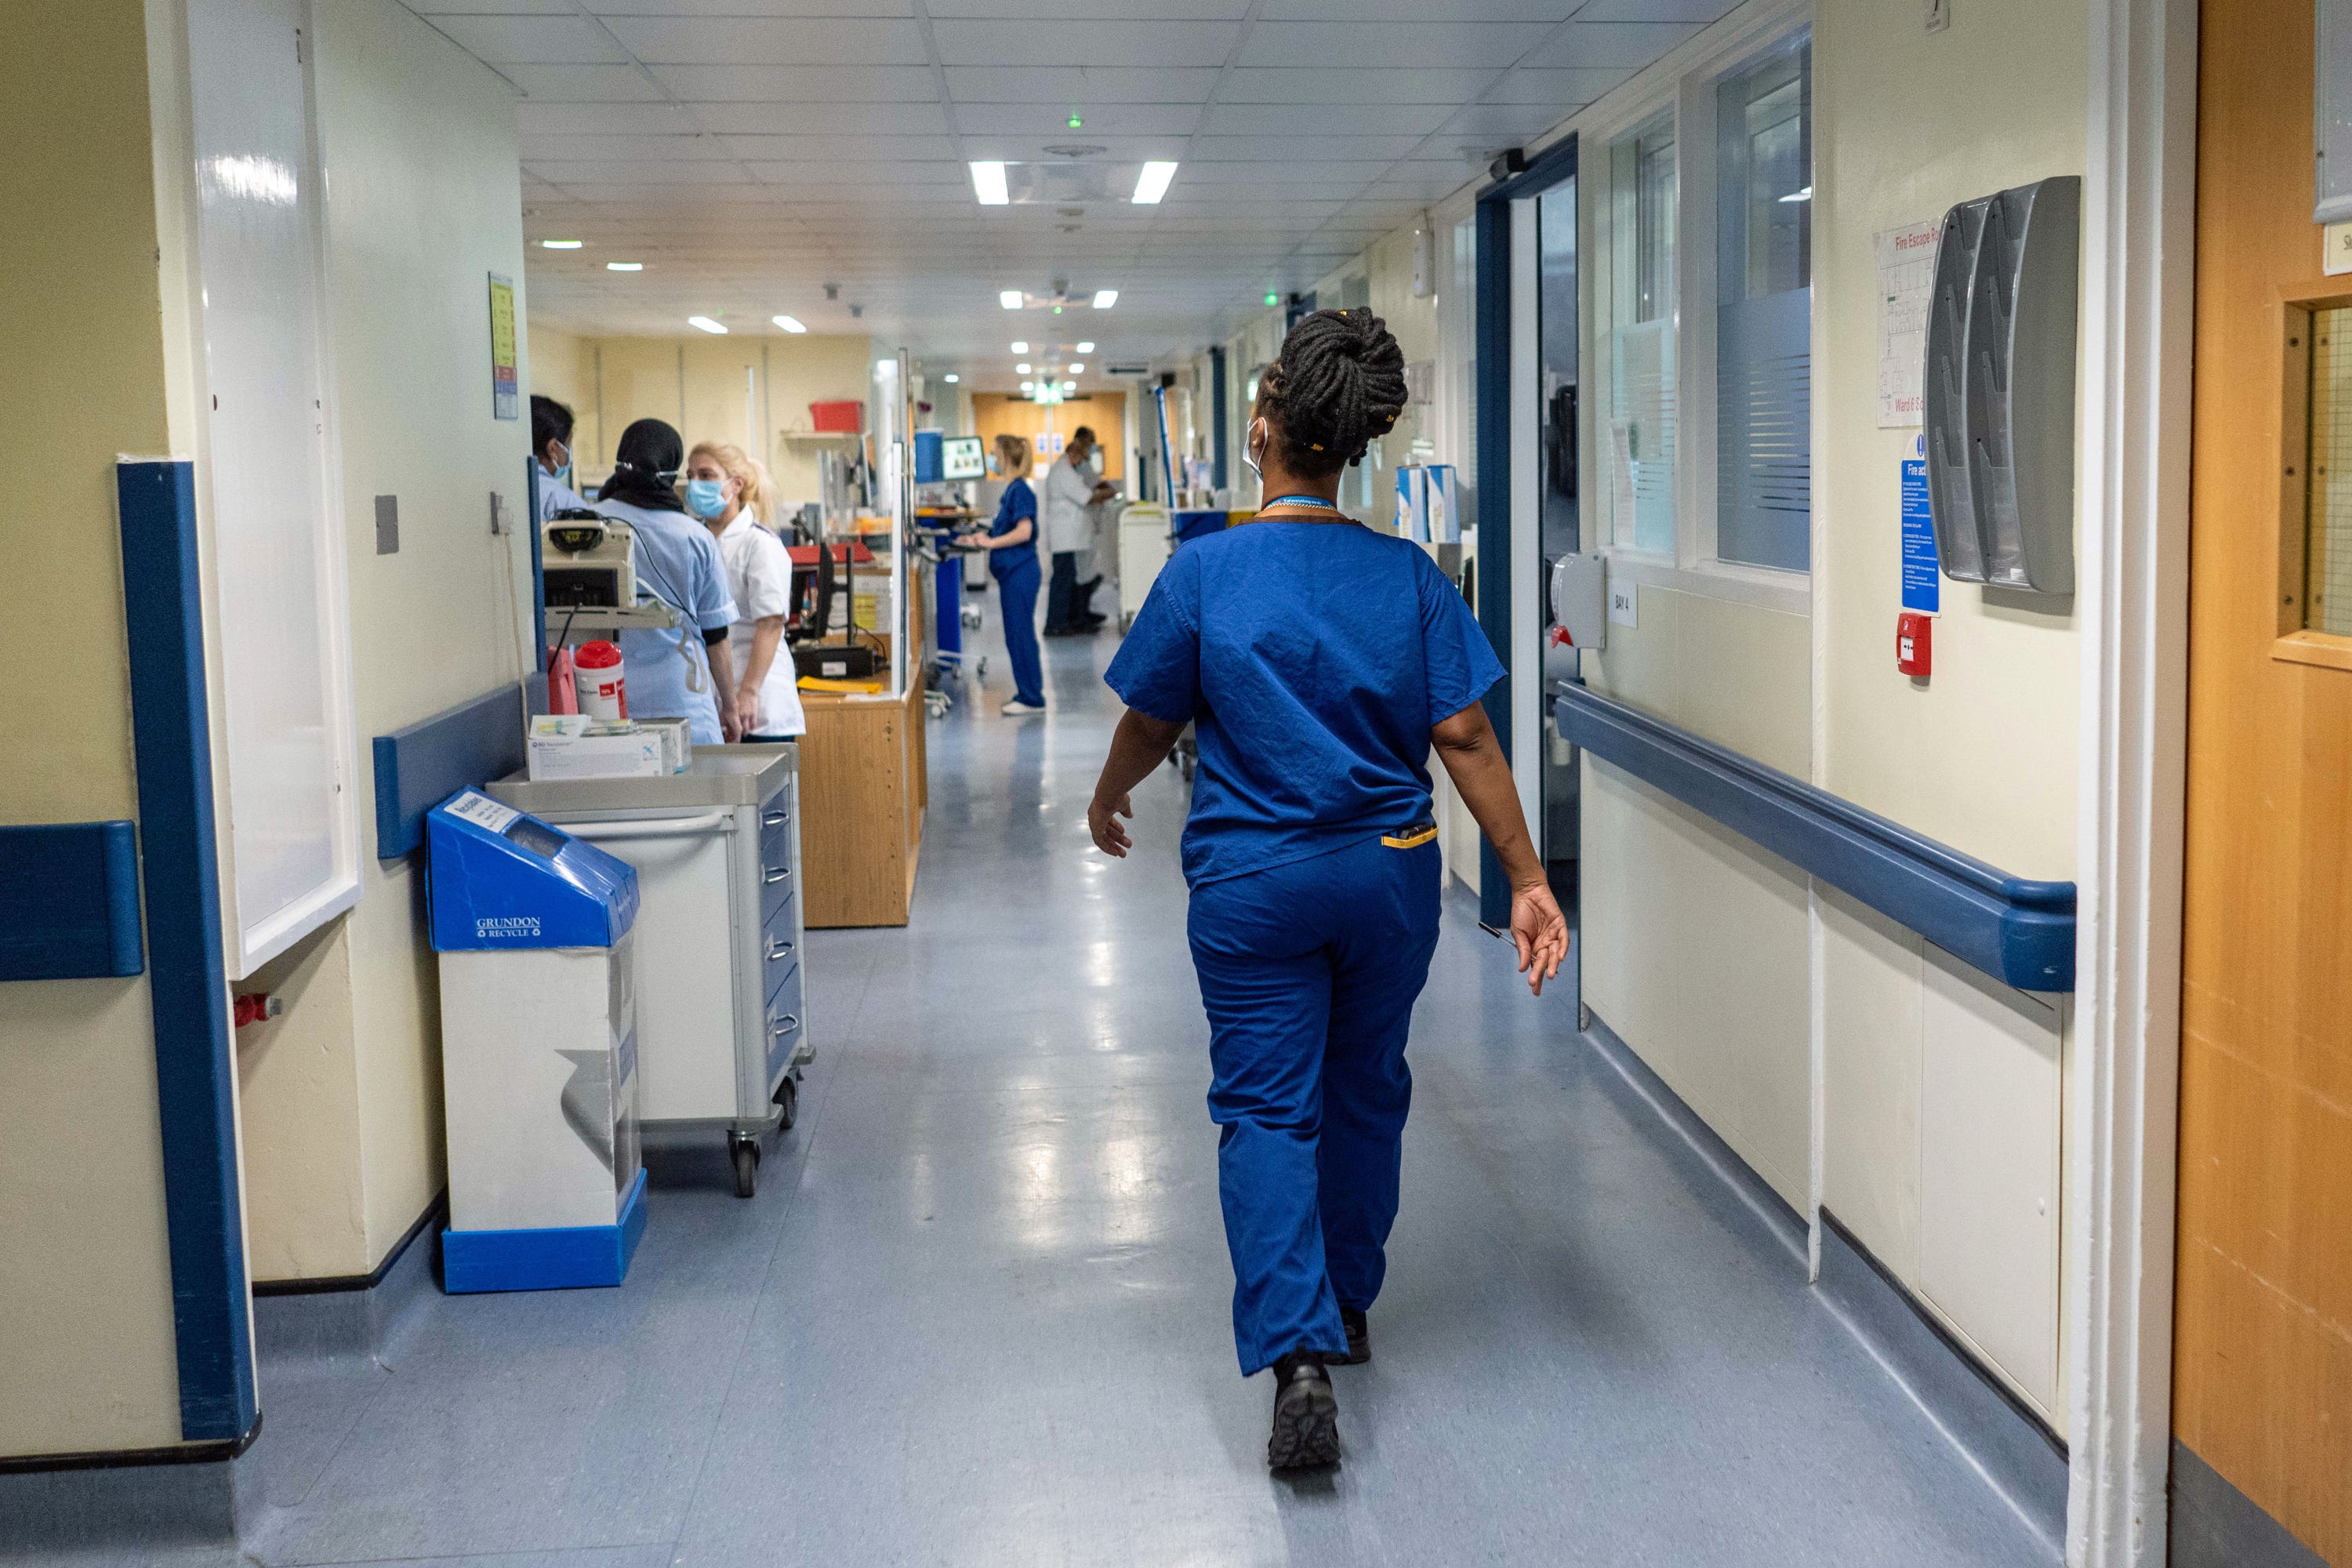 NHS workers are under ‘unsustainable pressure’, England’s health ombudsman says